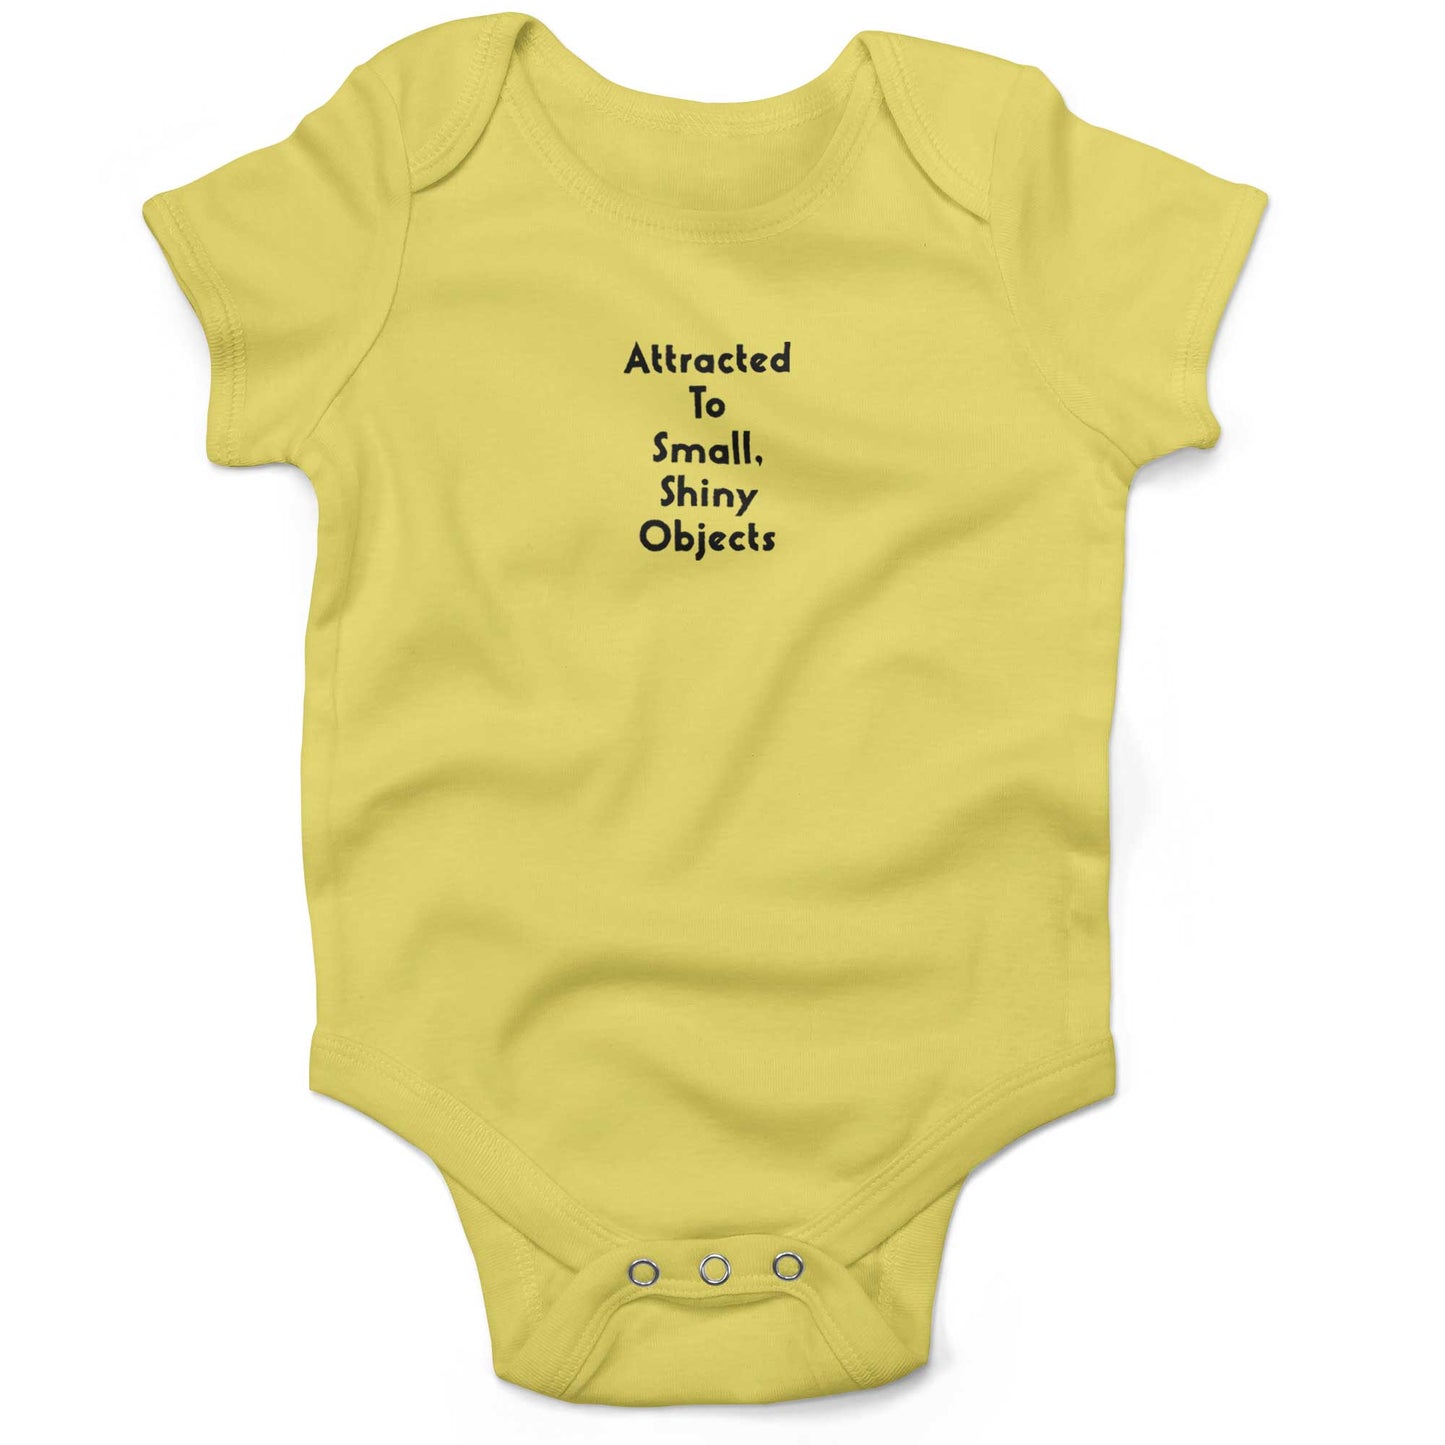 Attracted To Small, Shiny Objects Baby One Piece-Yellow-3-6 months